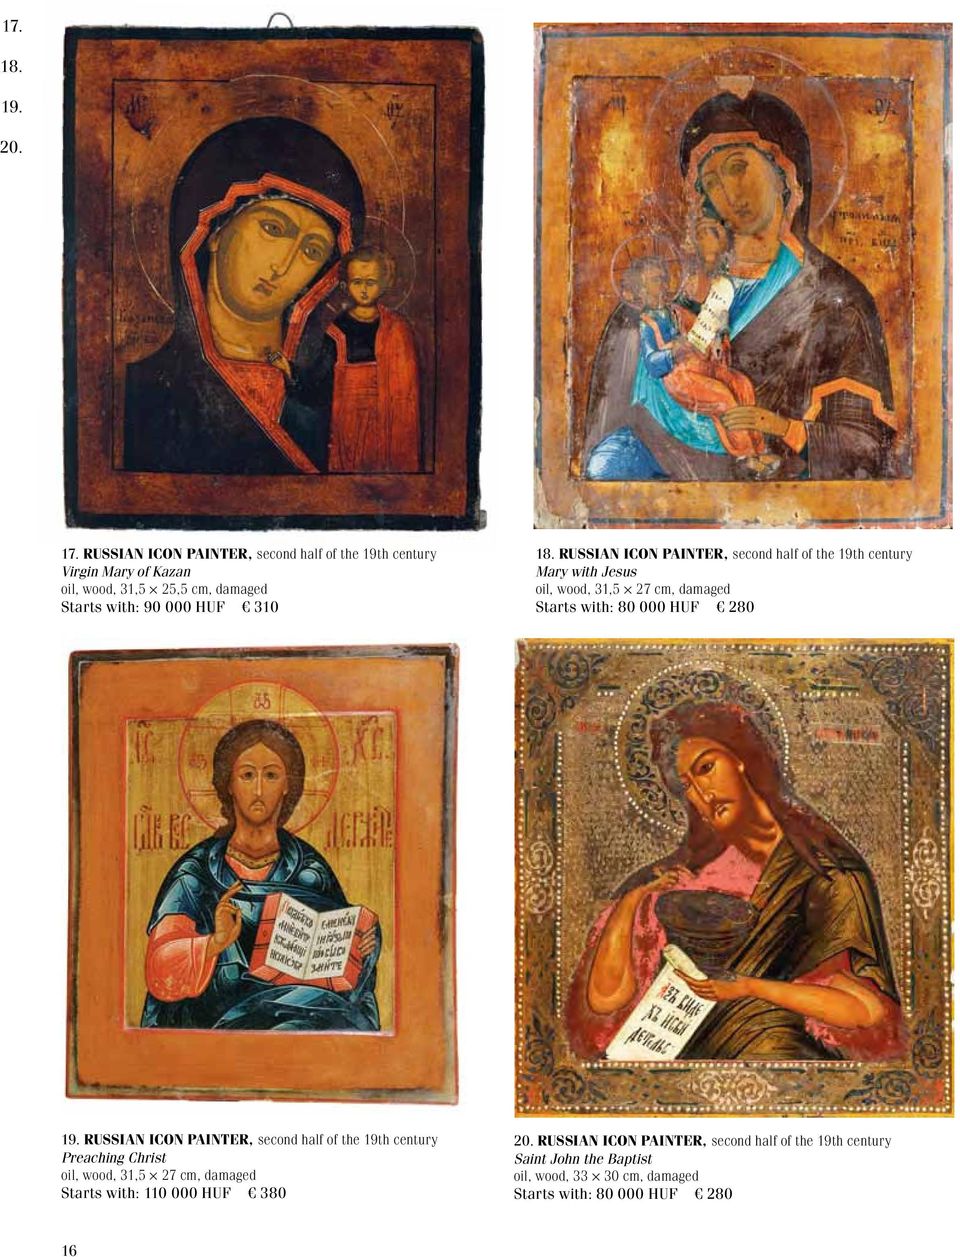 RuSSian icon painter, second half of the 19th century Mary with Jesus oil, wood, 31,5 27 cm, damaged Starts with: 80 000 HUF 280 19.